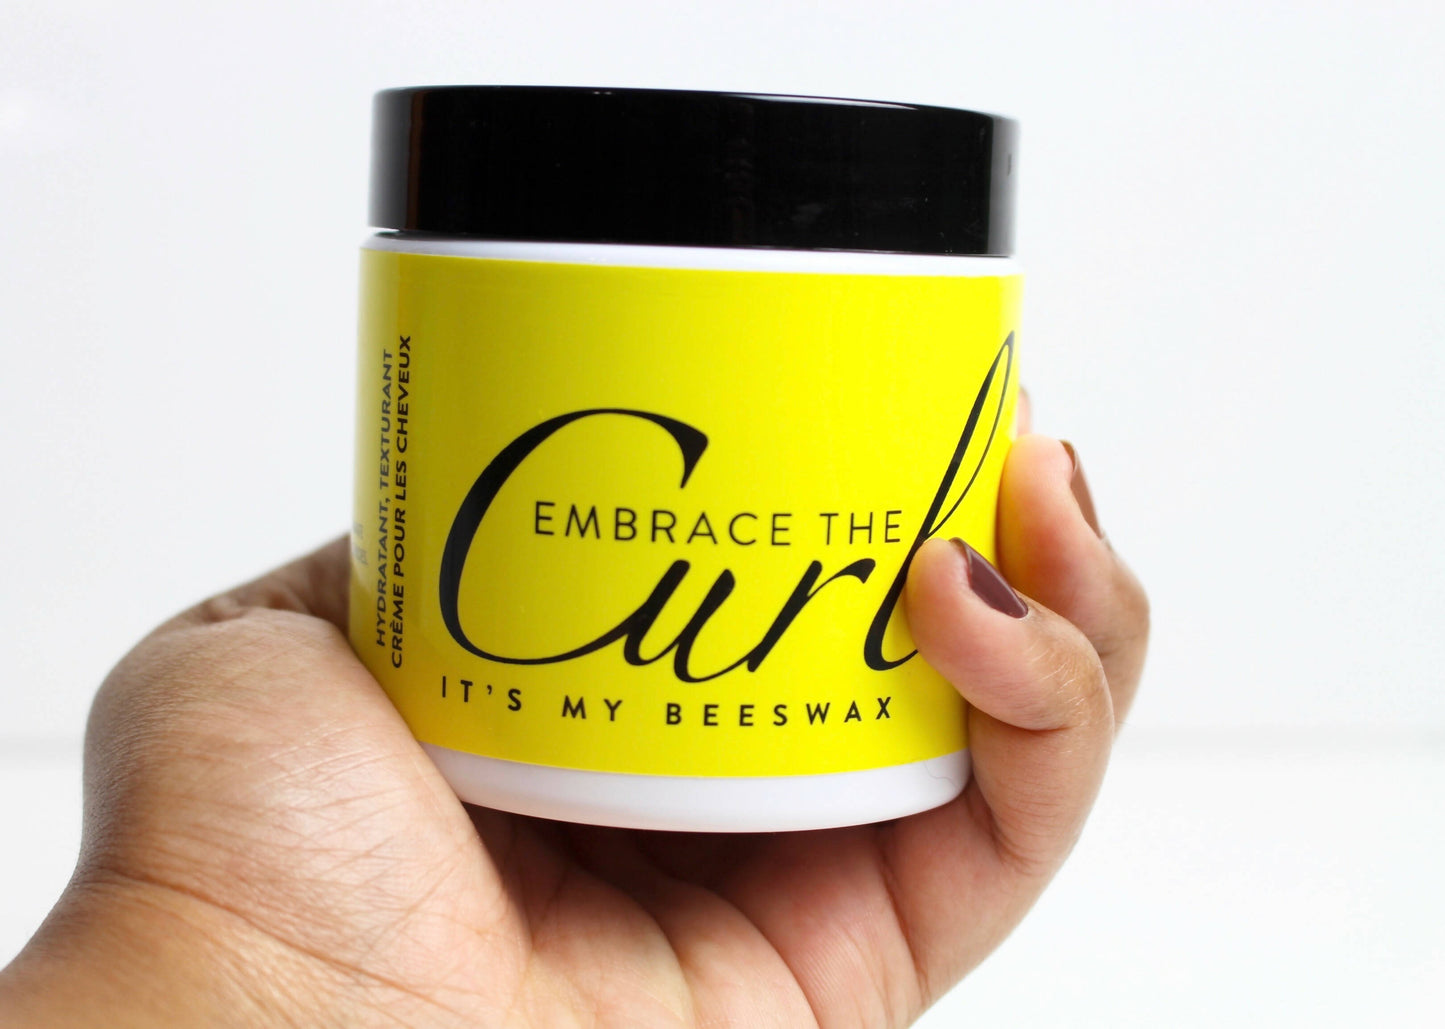 Embrace the Curl It's My Beeswax Cream